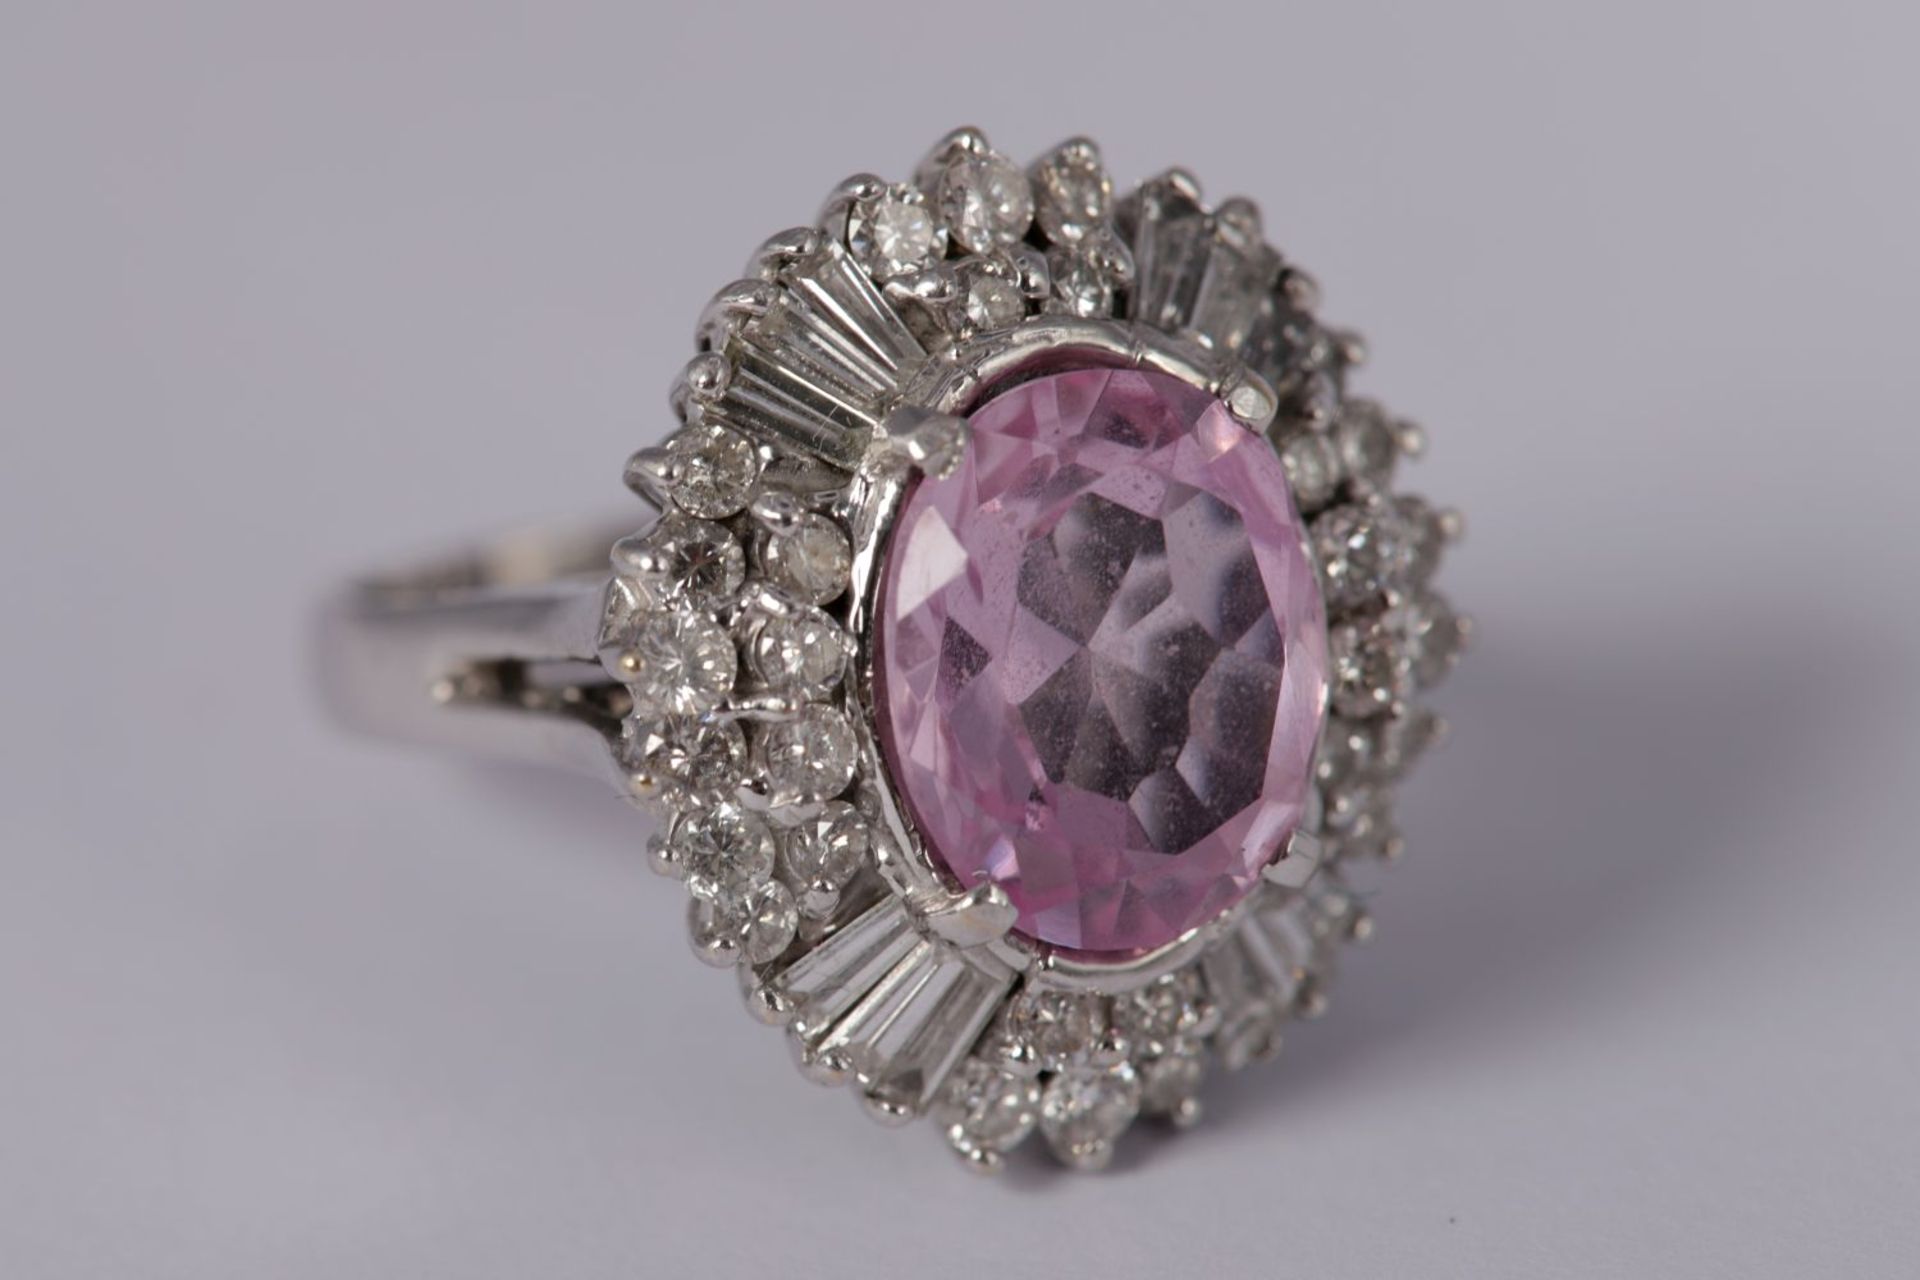 14 CARAT PINK SAPPHIRE AND DIAMOND RING - Image 3 of 4